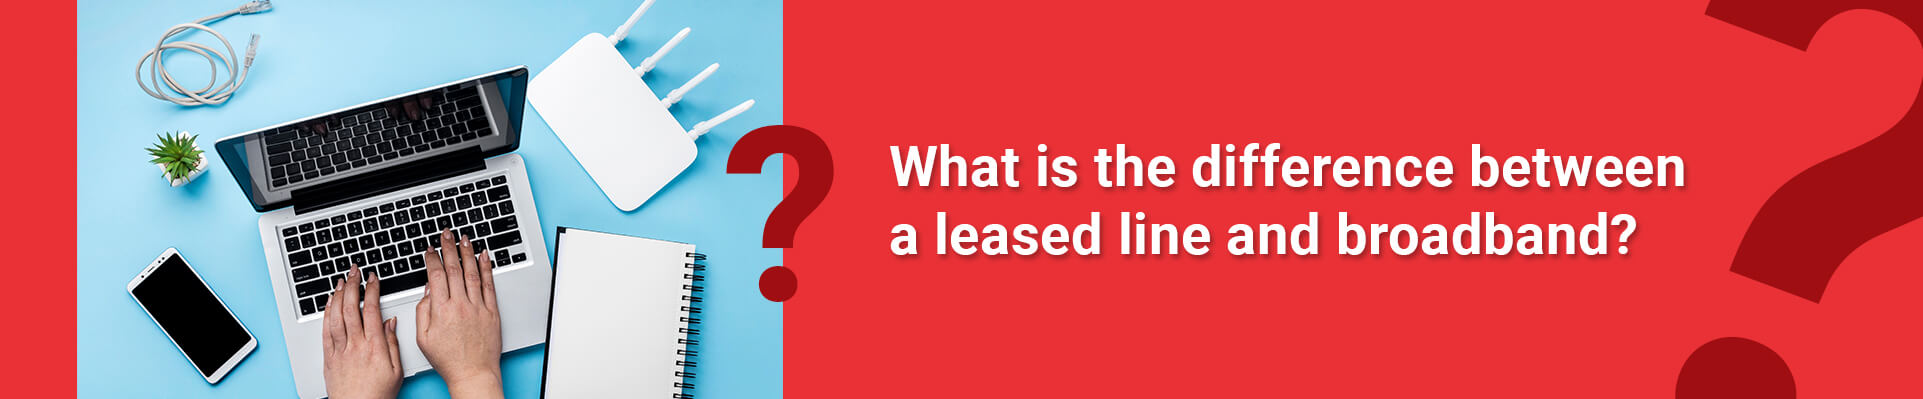 What is the difference between a leased line and broadband?